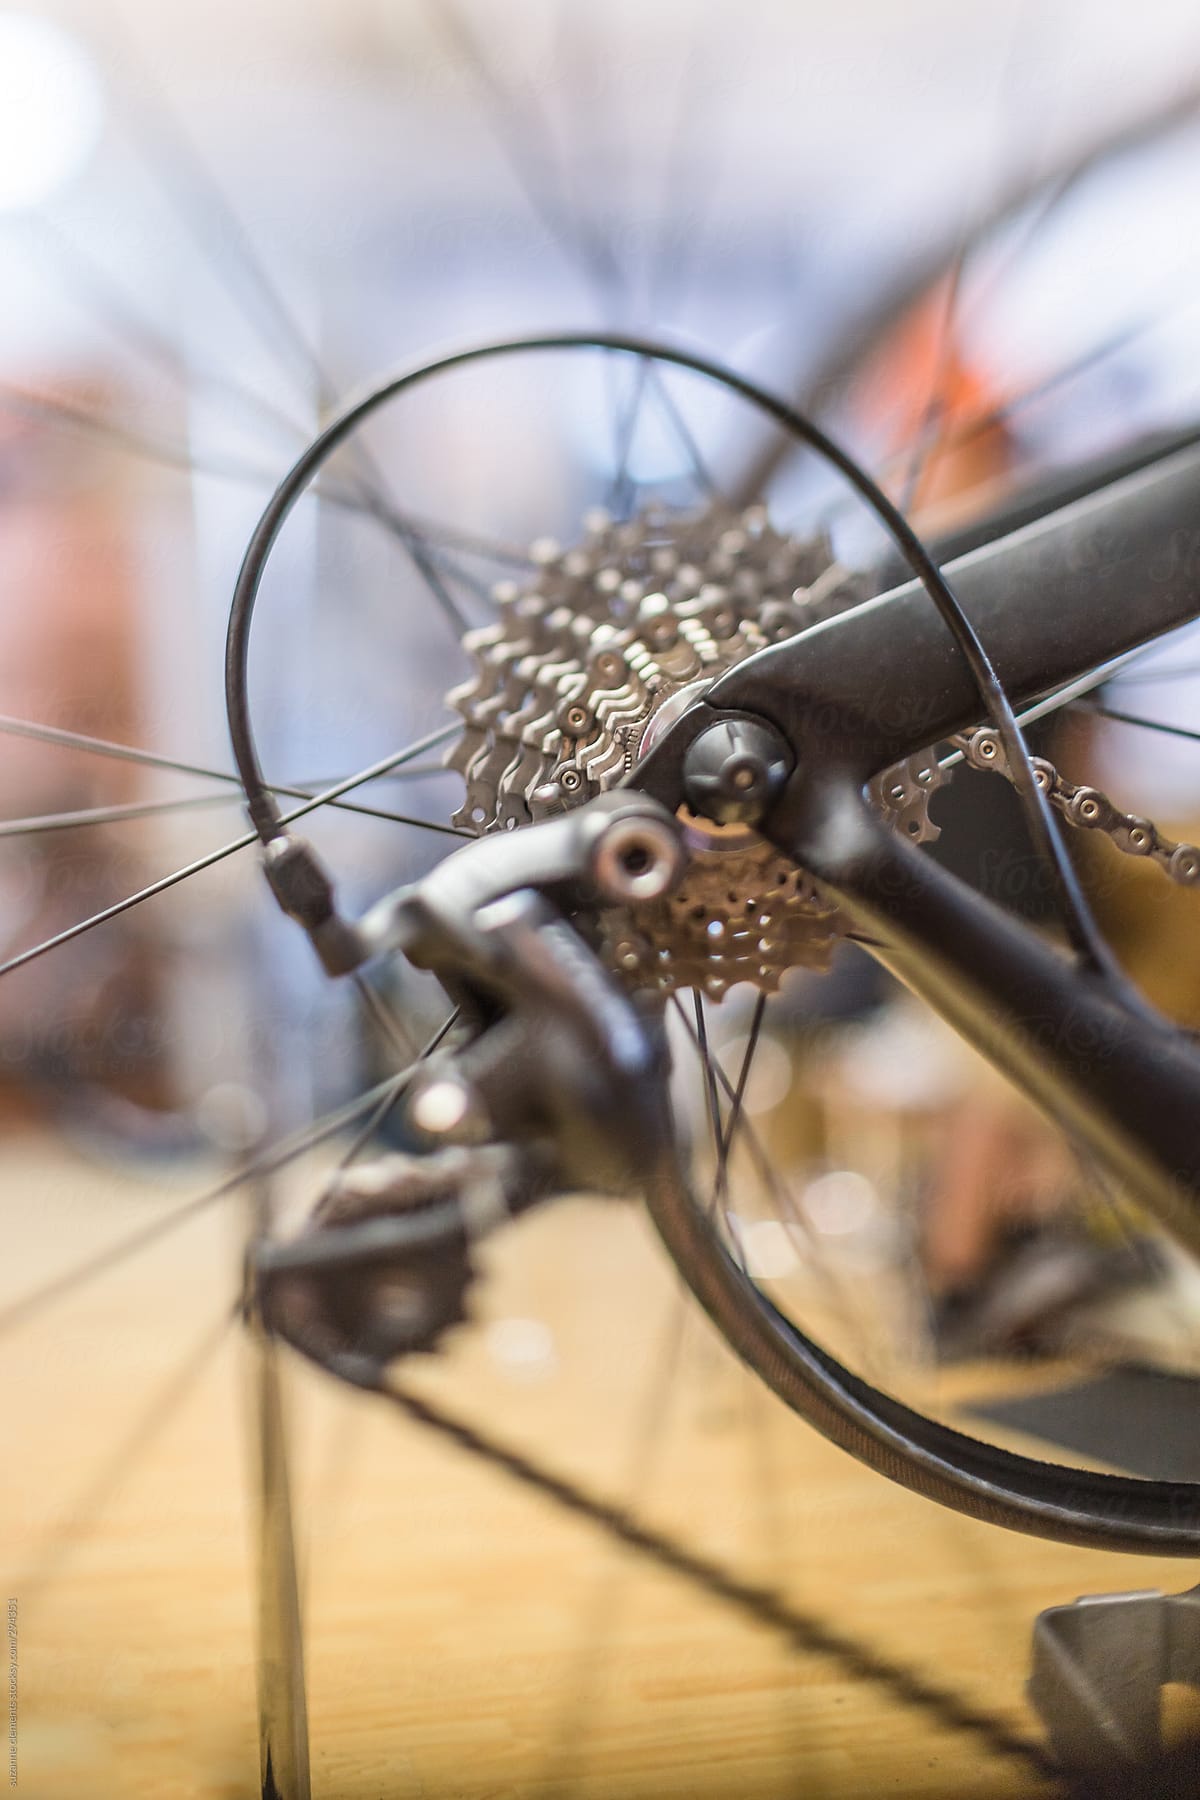 Close up View of a Bicycle Wheel Gears and Spokes